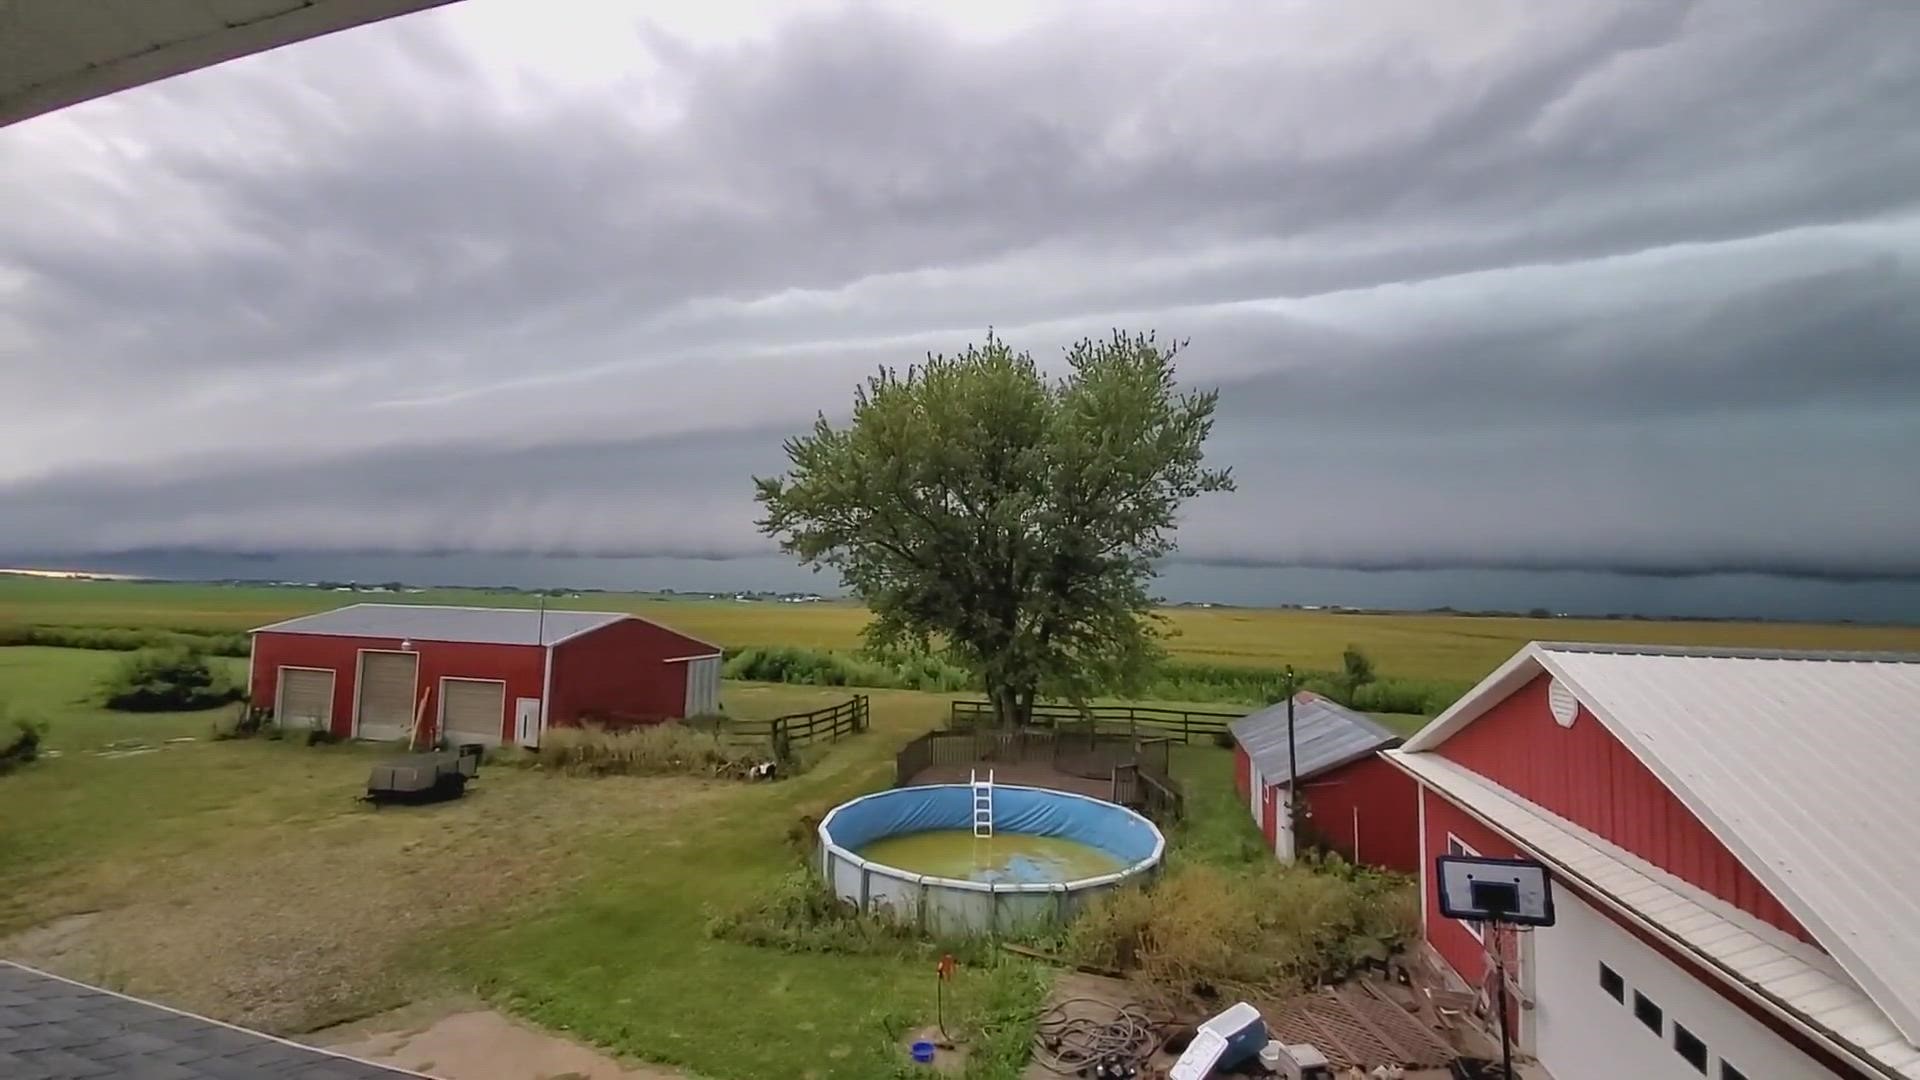 The second shelf cloud of the storms today at 18:37. Looking west
Credit: Tina Ferrel